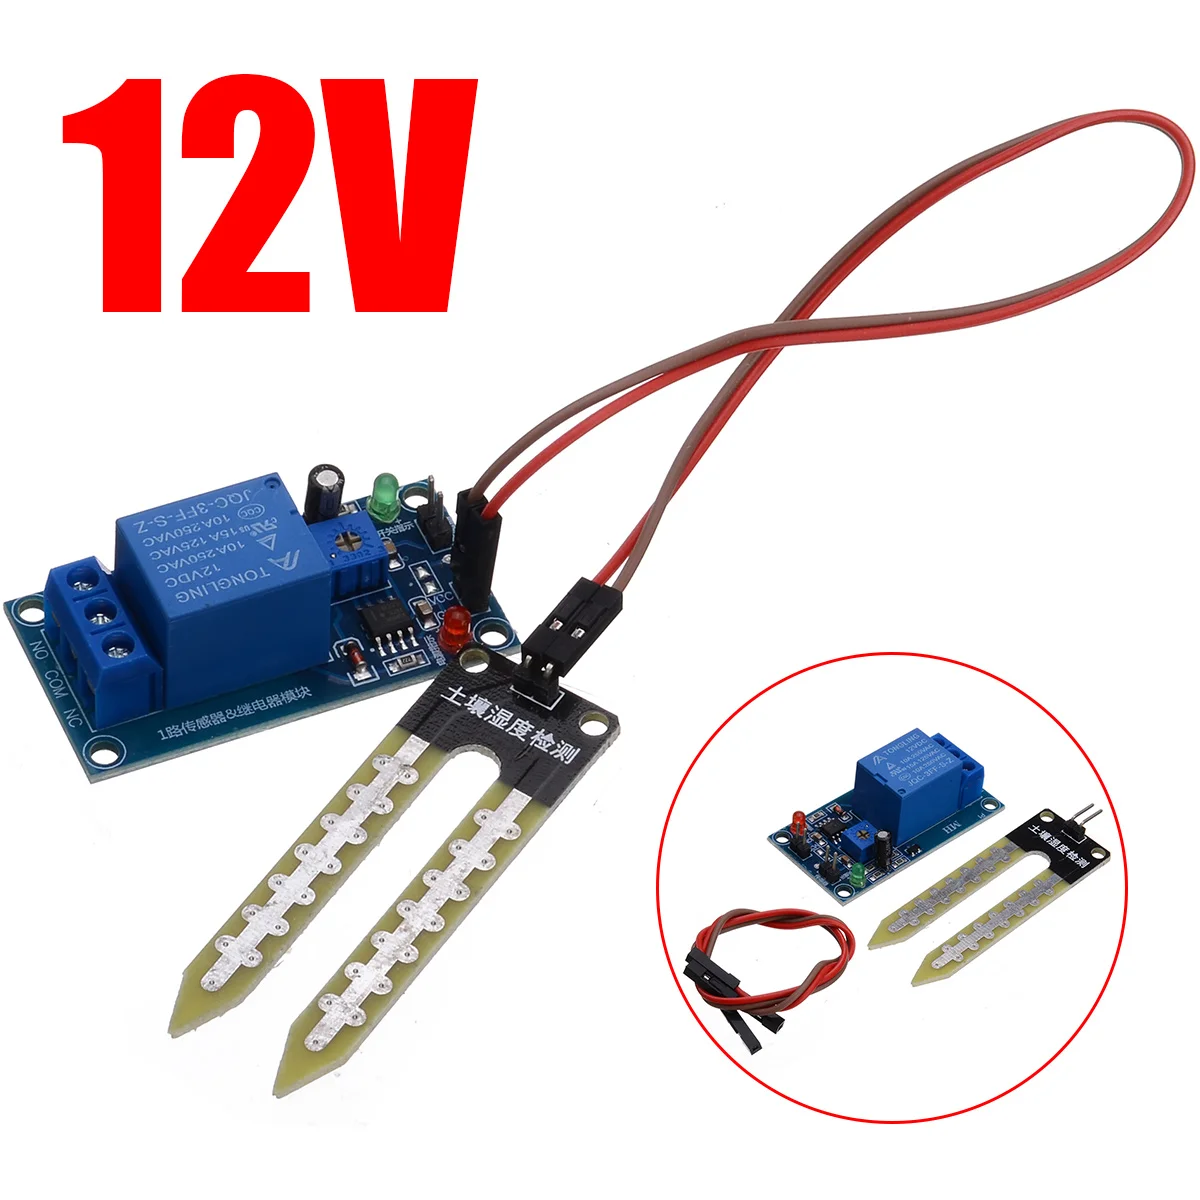 Details about   DC 12V Soil Moisture Sensor Controller Relay Modules Automatic Watering XY 